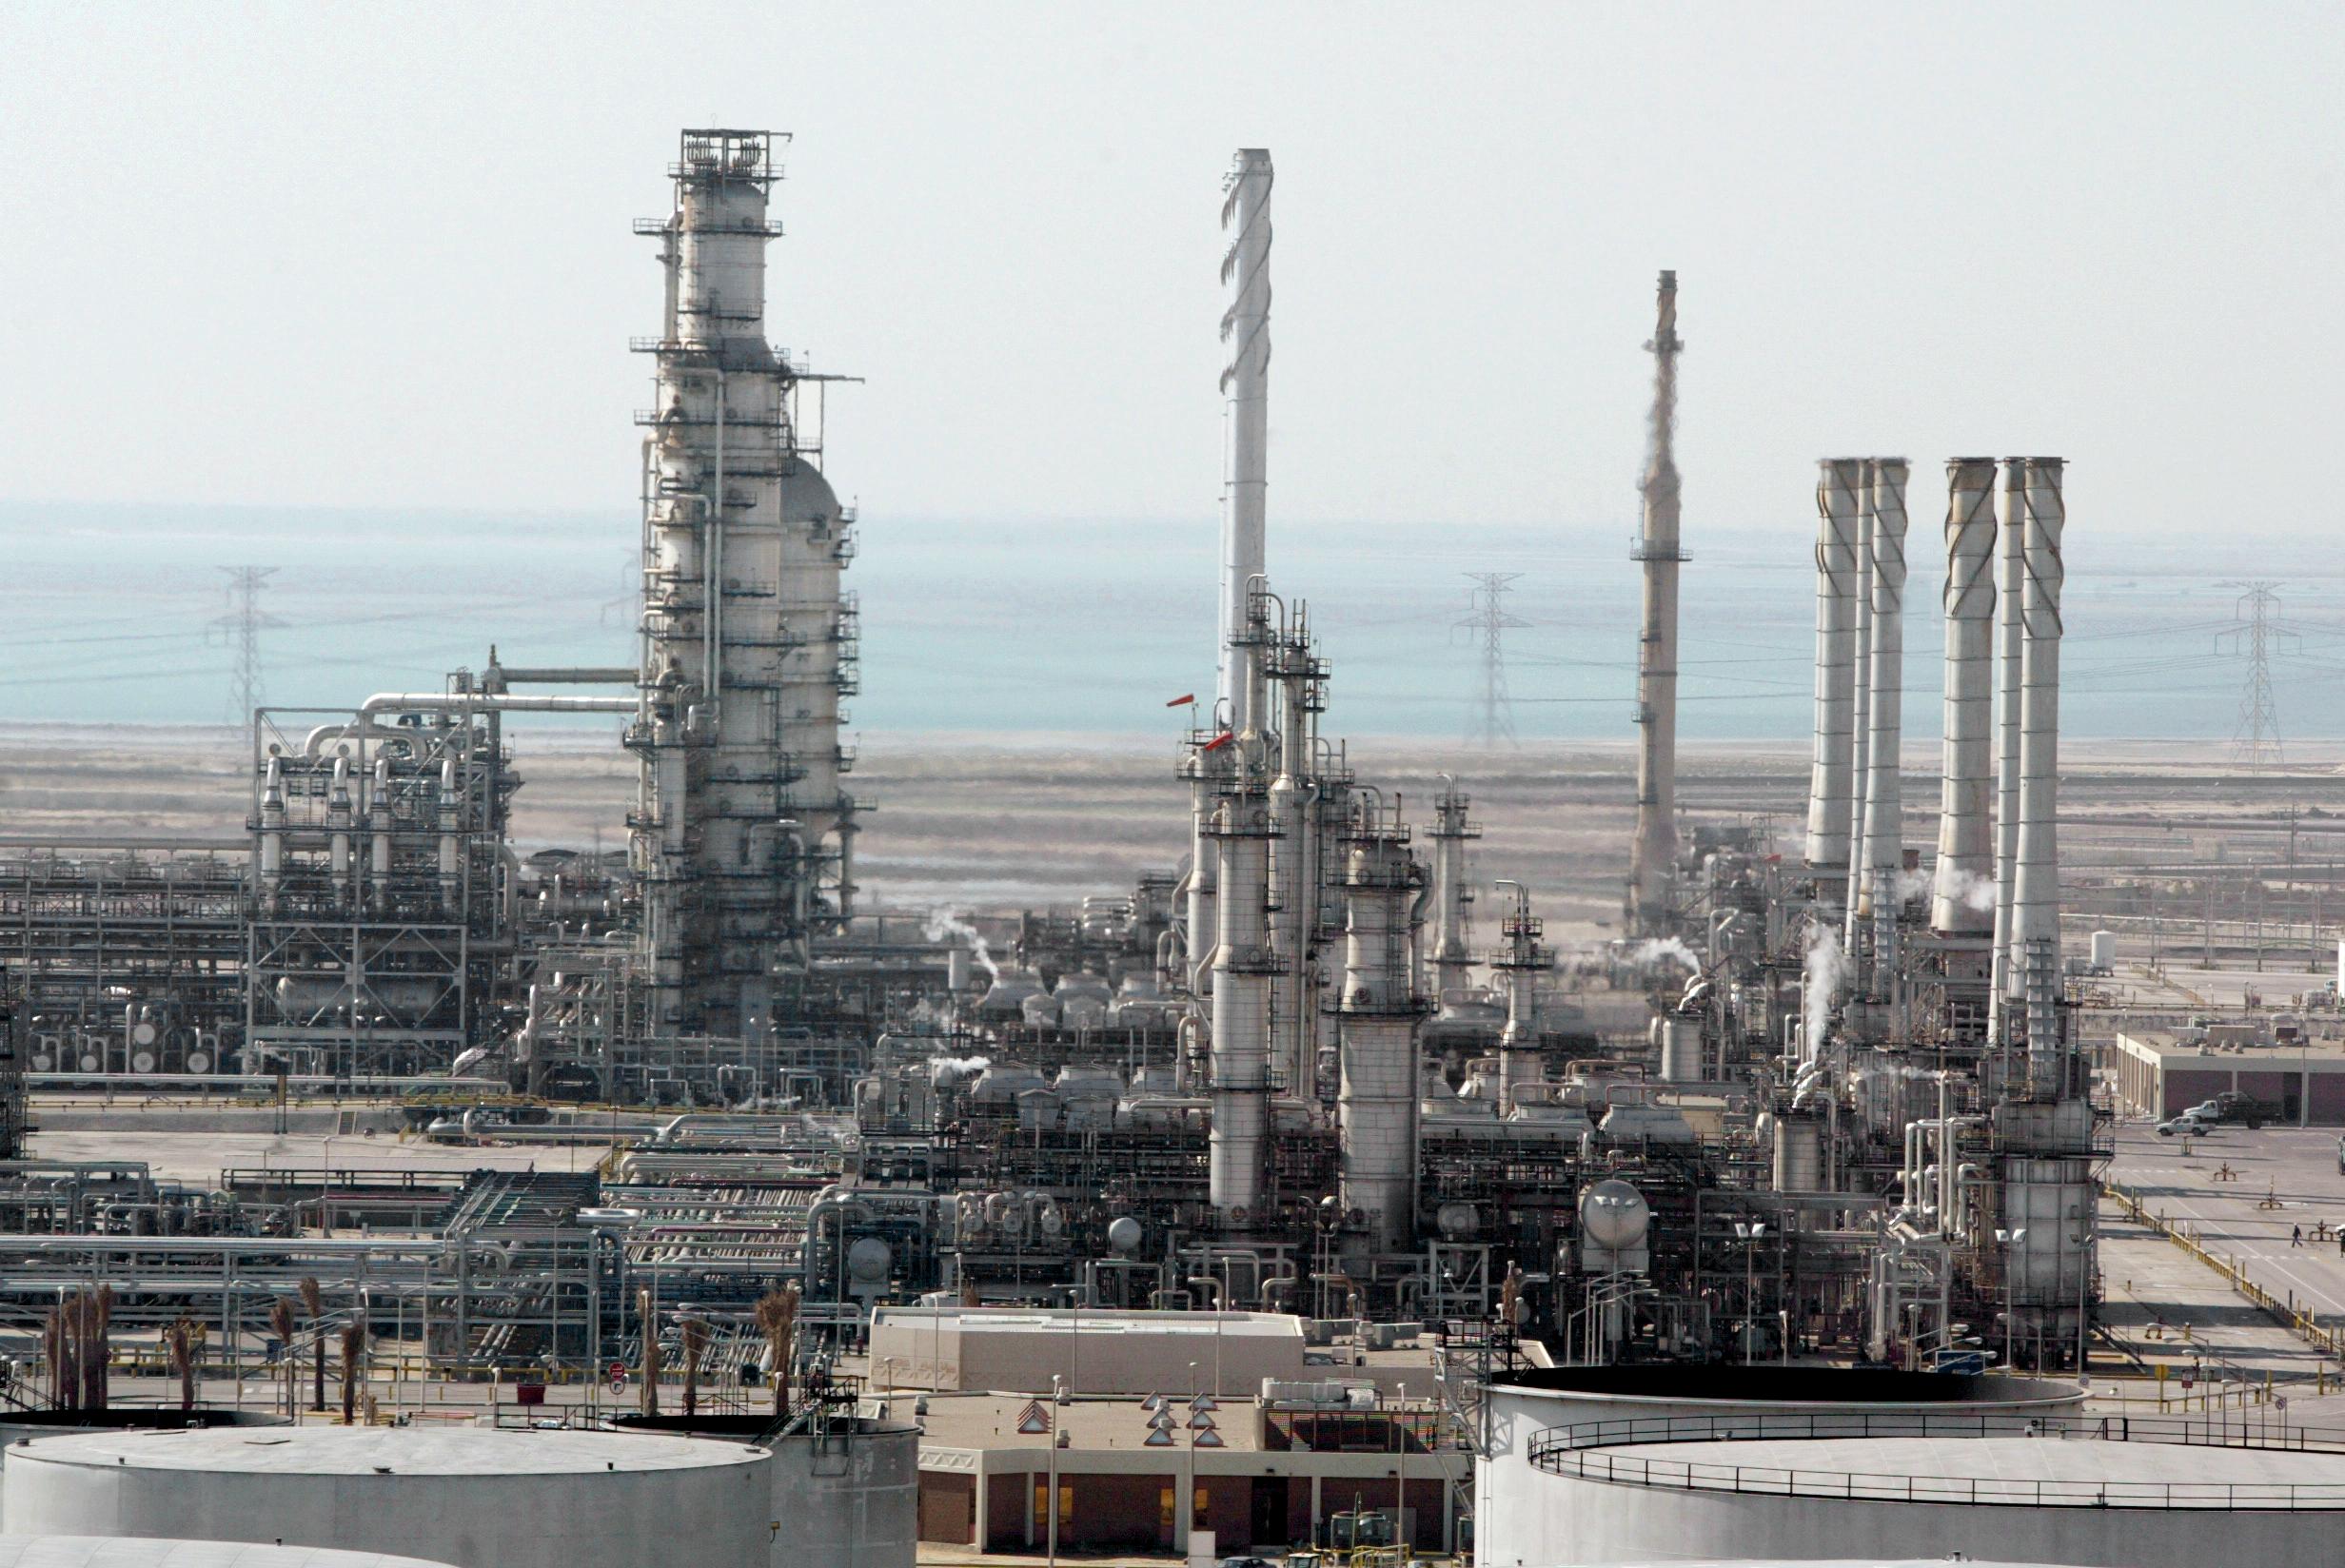 An oil plant in top Opec producer Saudi Arabia as non-Opec and non-shale producers find themselves struggling to stay viable in a depressed oil market. Photo: AFP 